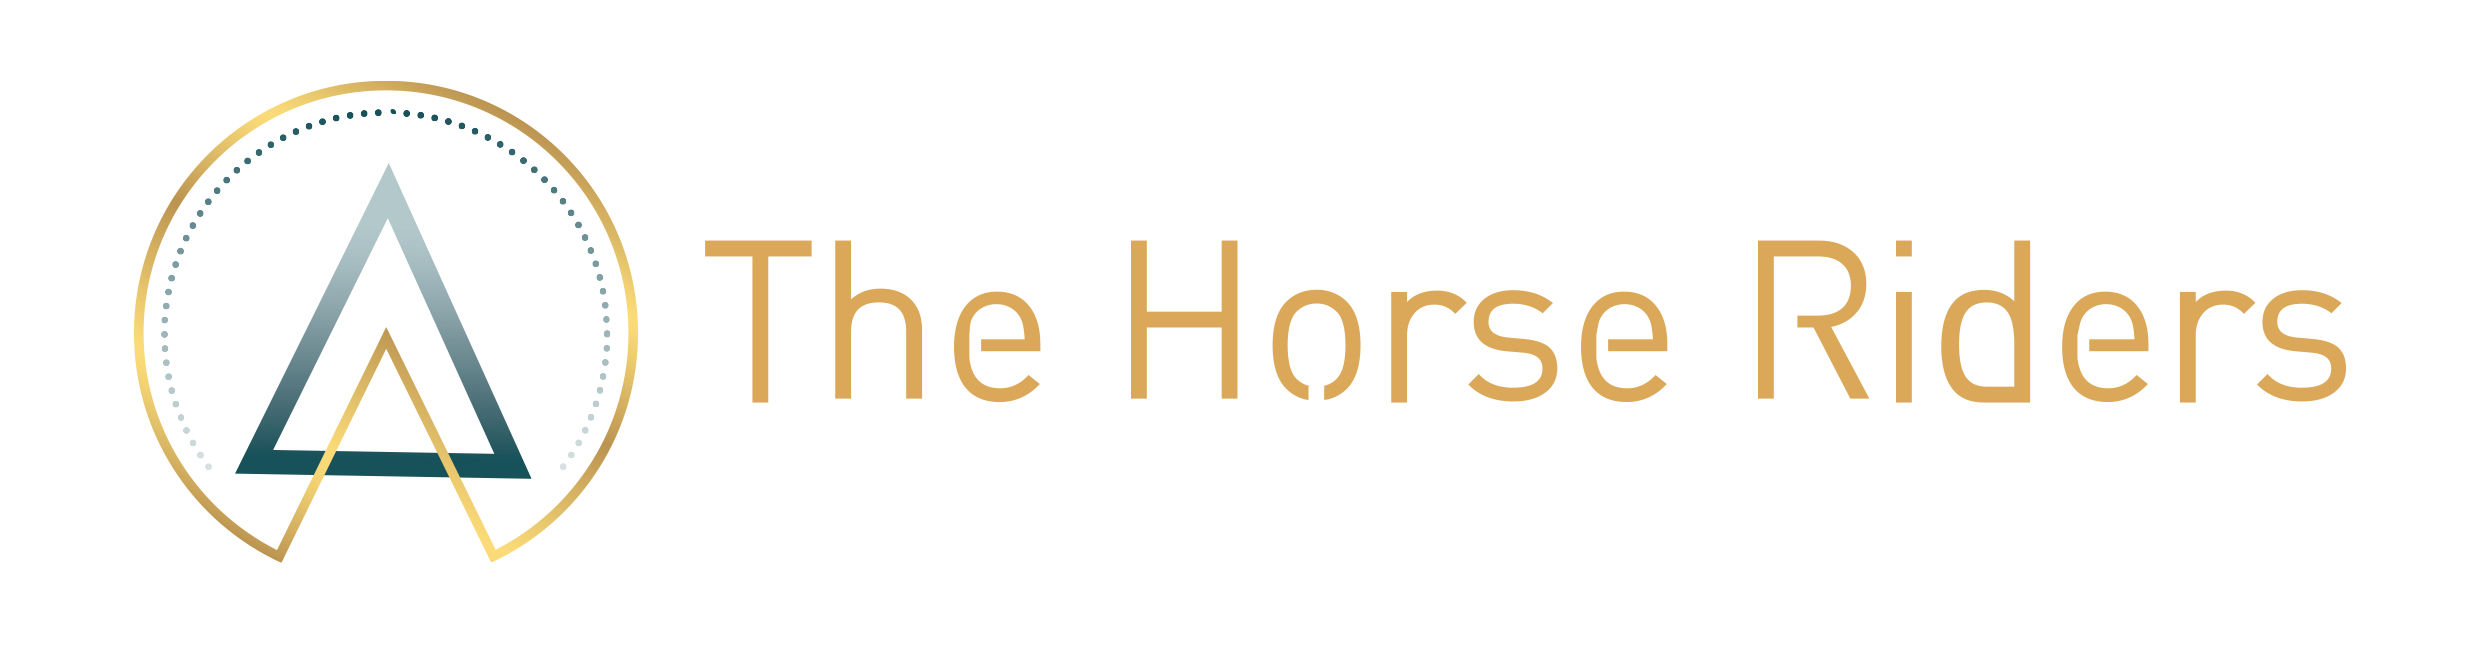 The Horse Riders Shop